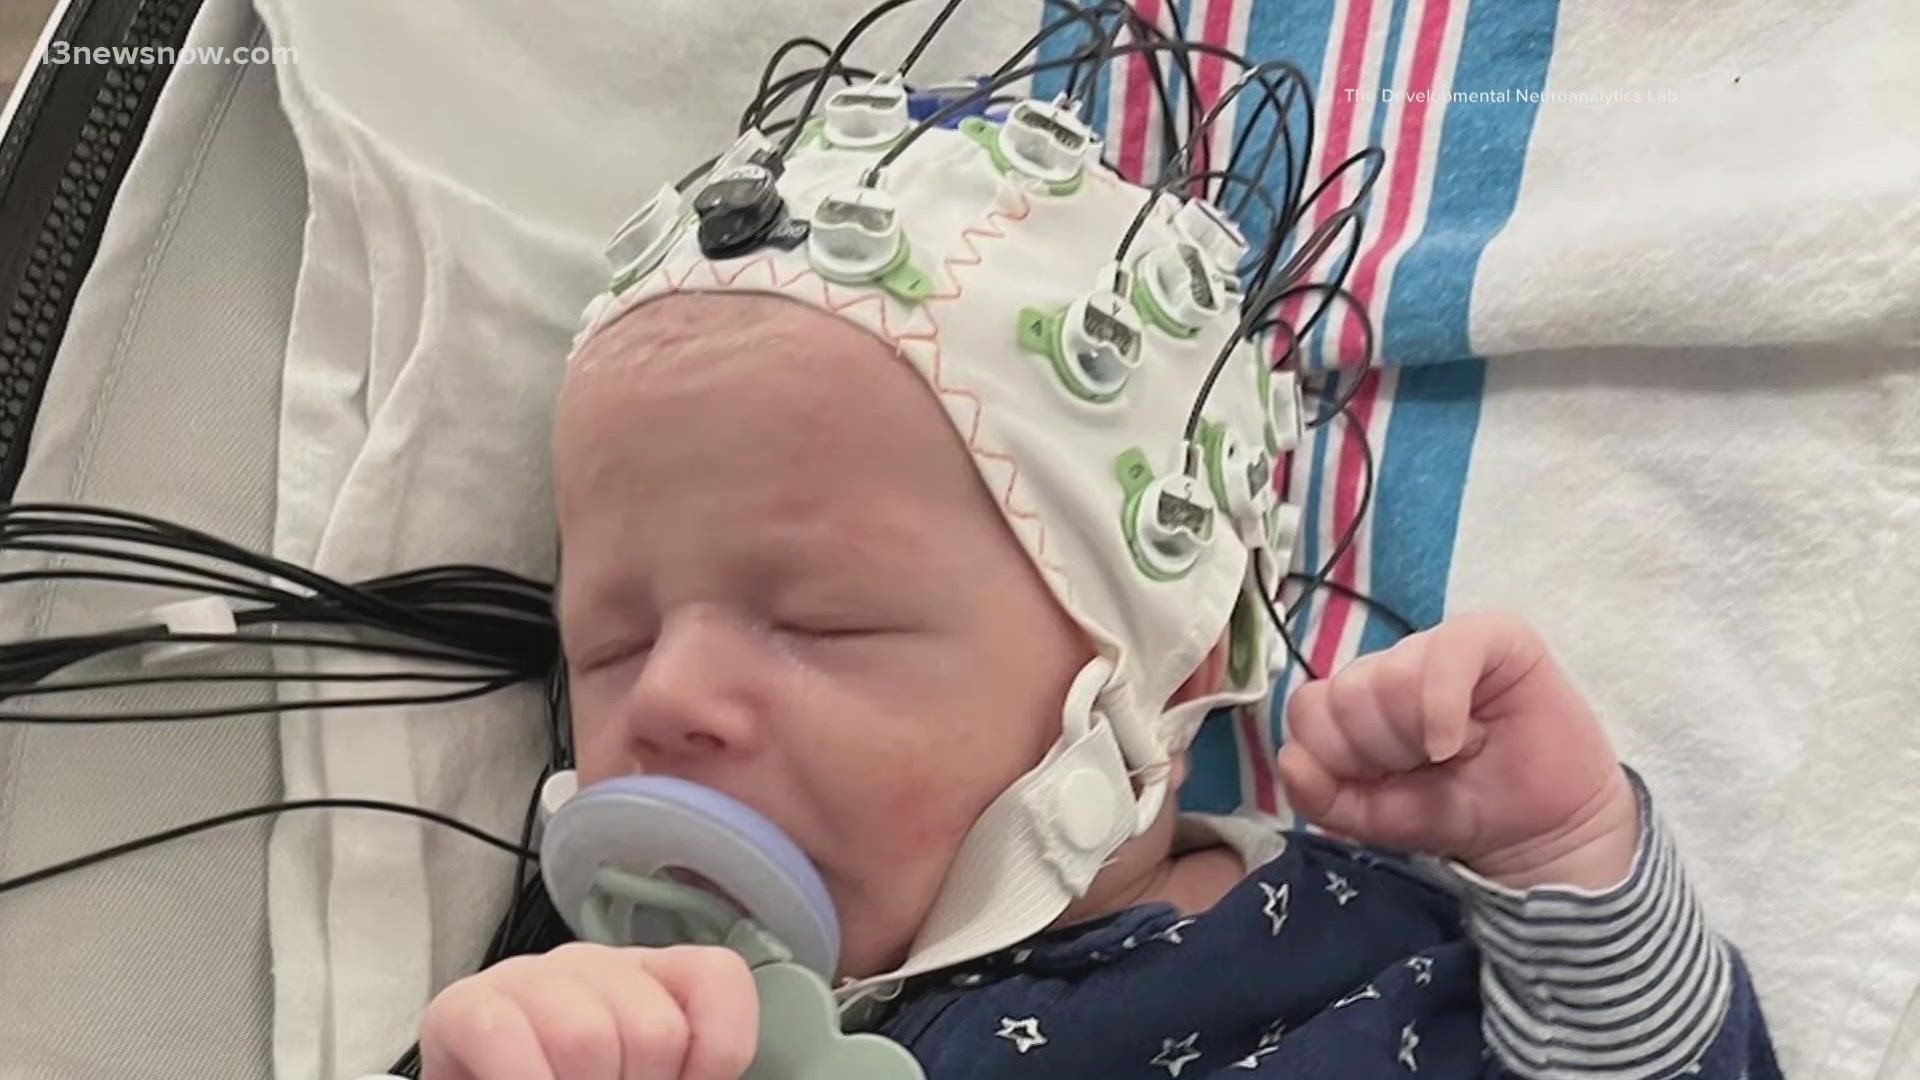 Some children on the autism spectrum aren't diagnosed until age 4 or 5. New research is working to detect autism in newborns.